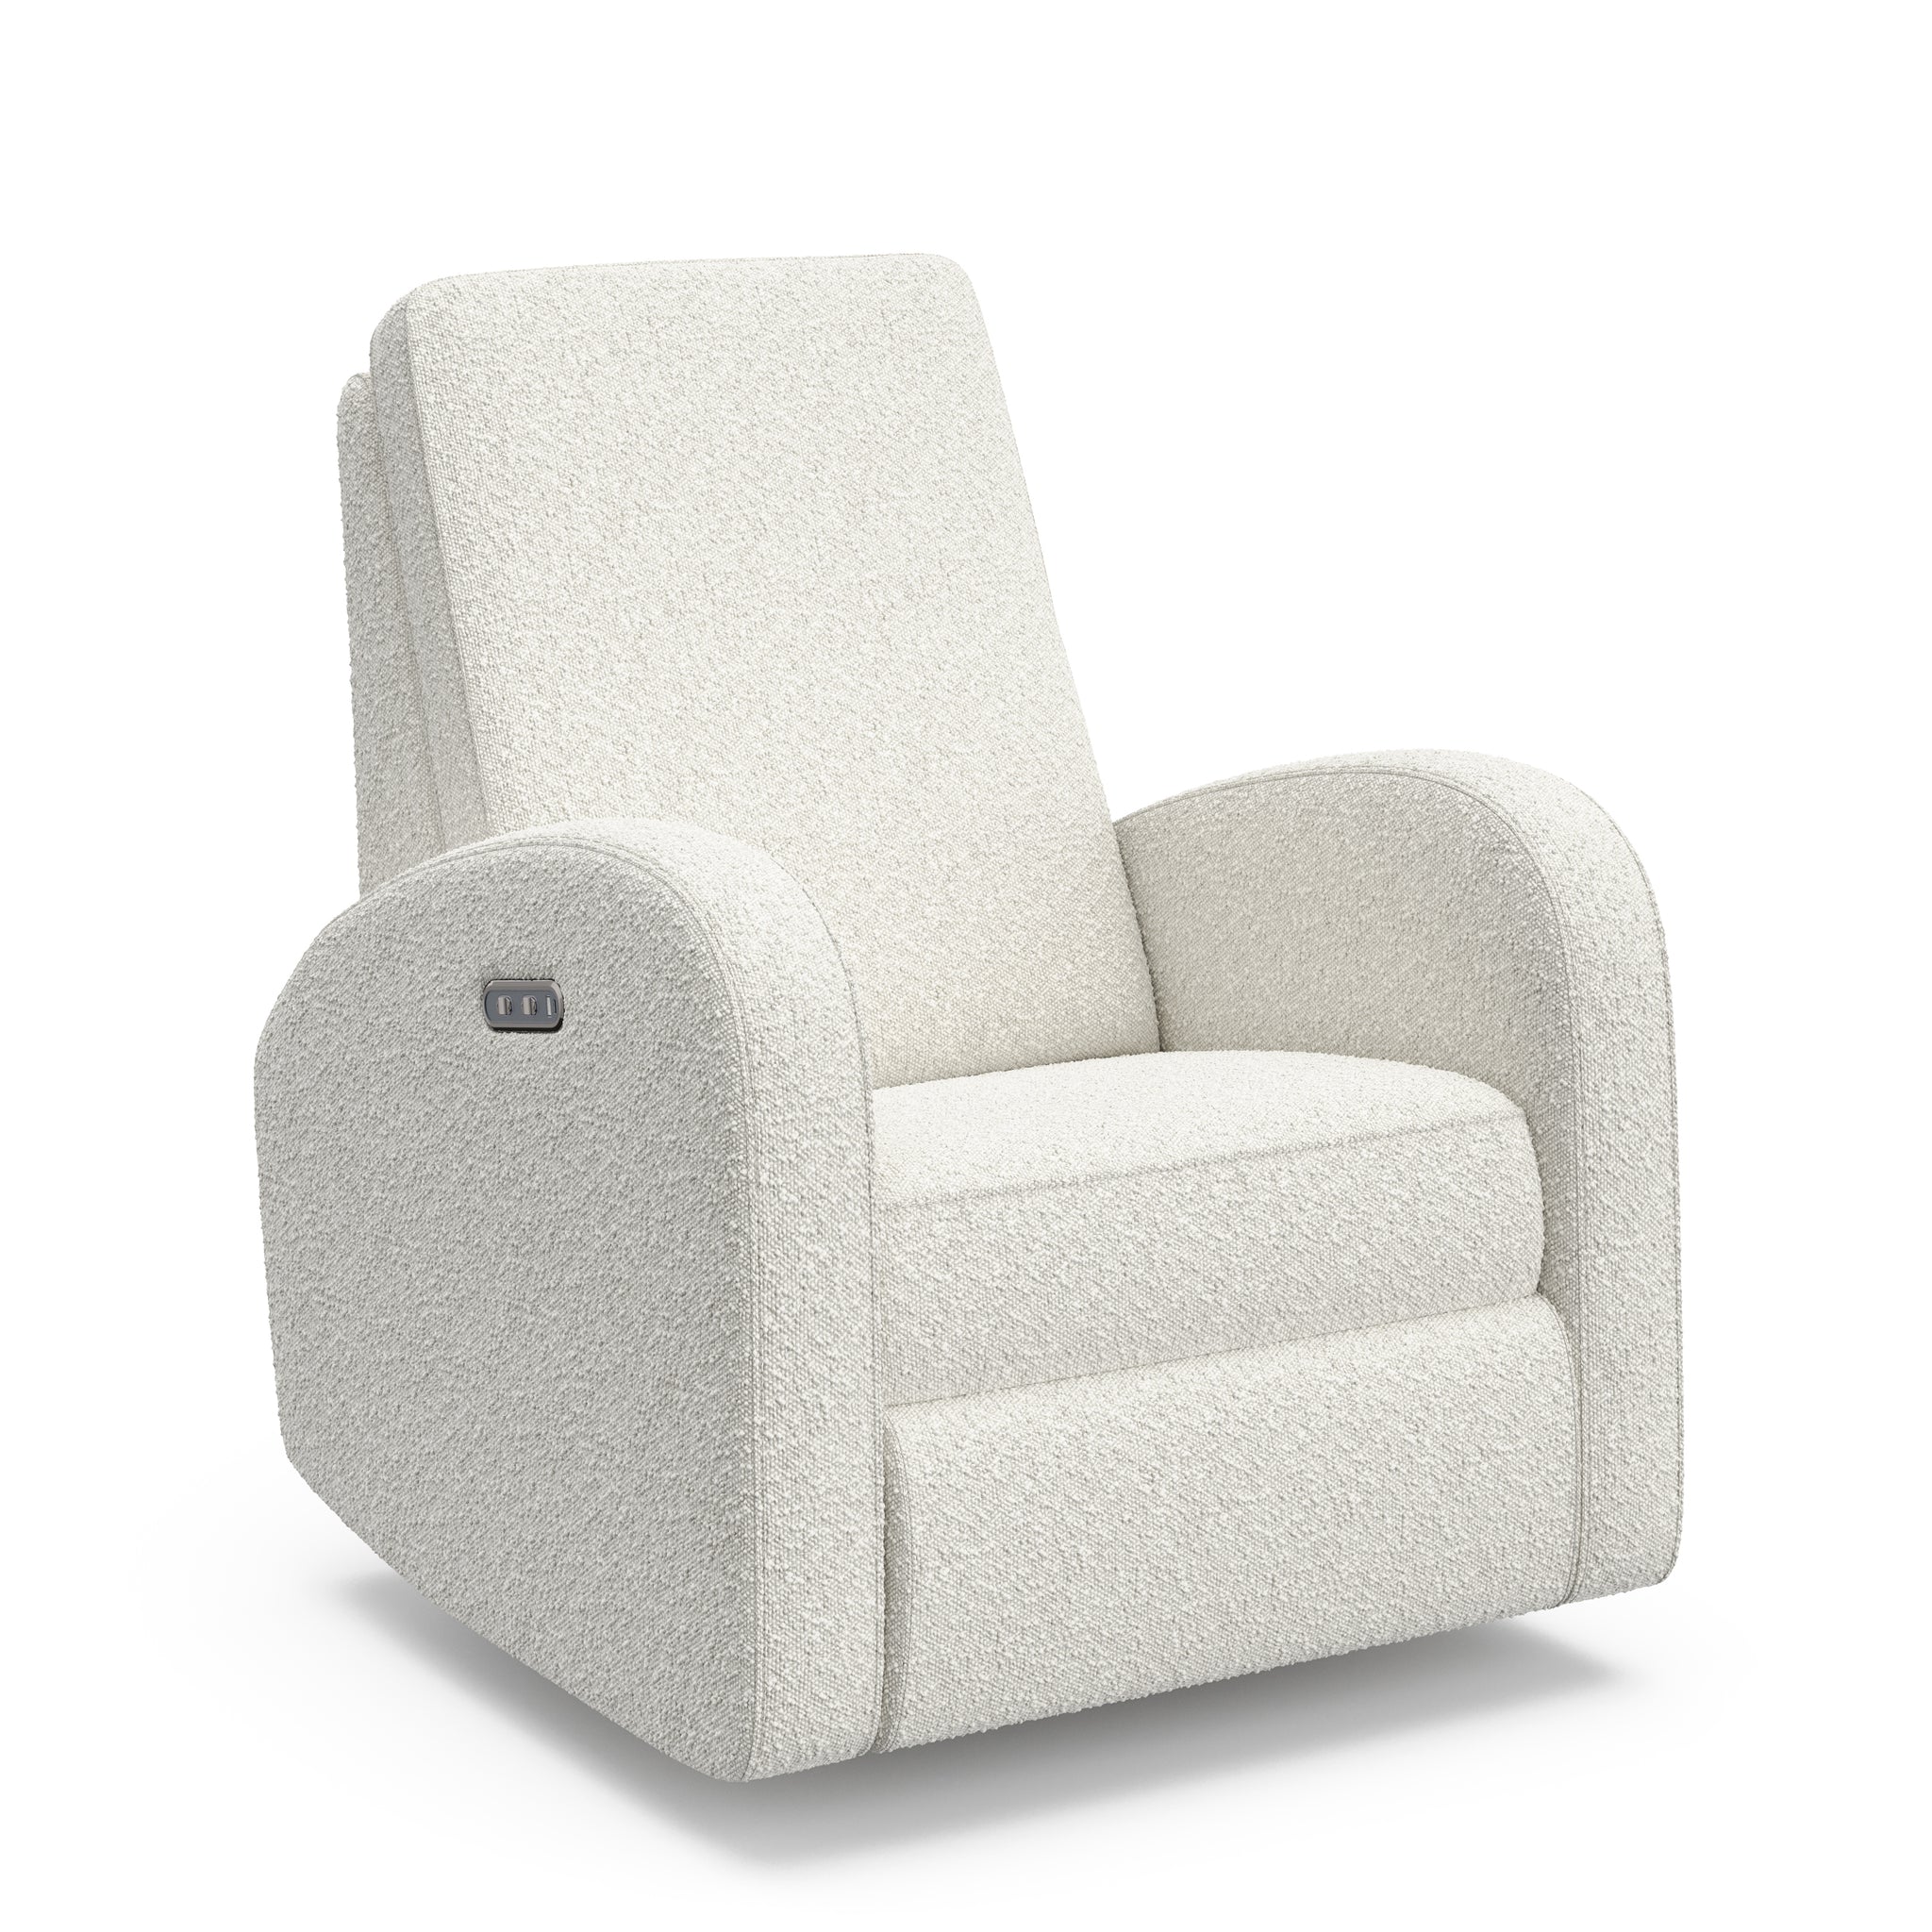 Angled view of an ivory boucle reclining glider